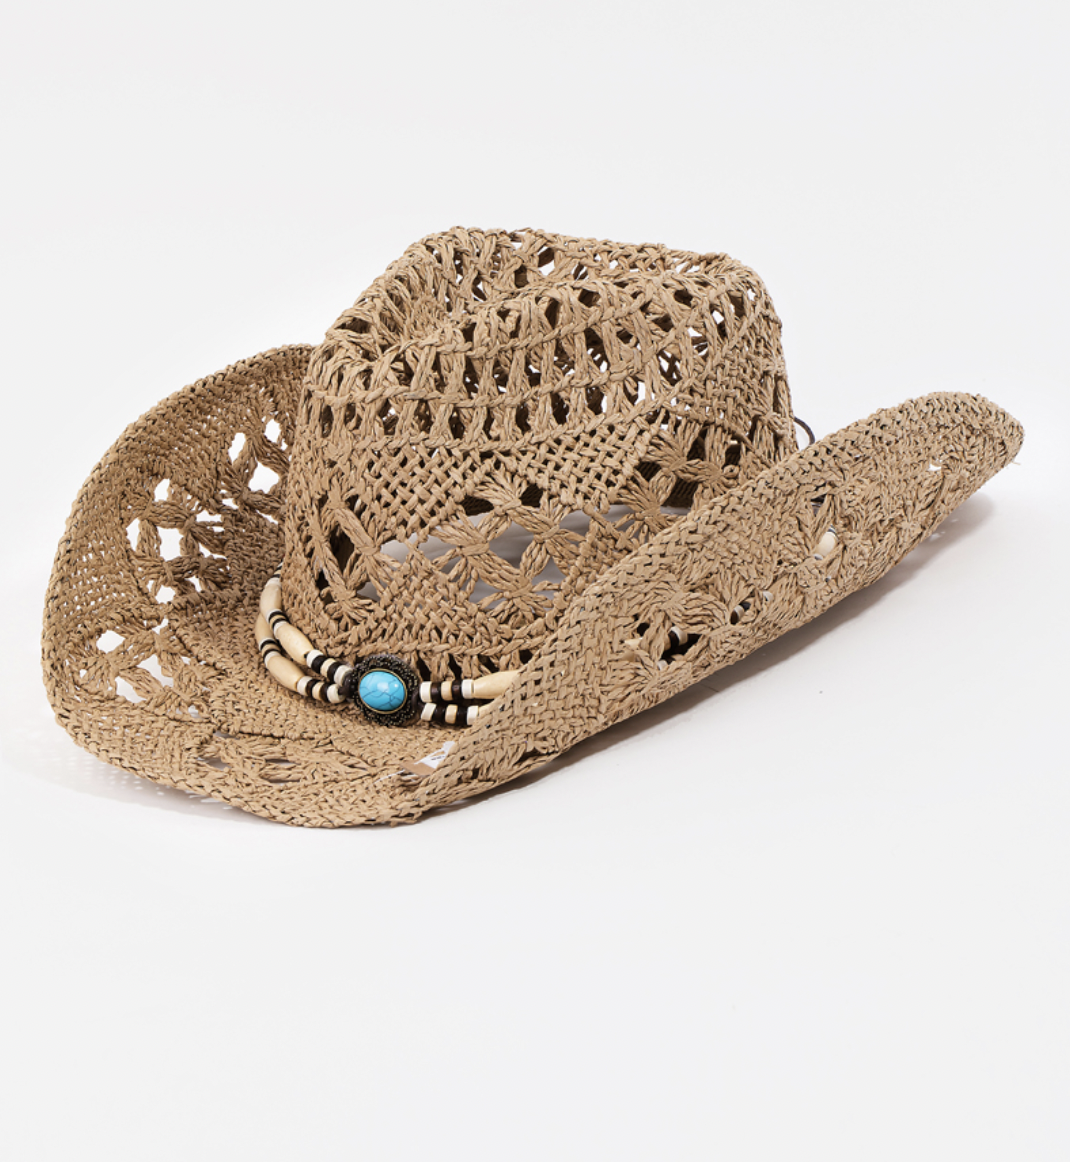 FAME ACCESSORIES COURTNEY COWGIRL HAT-KHAKI